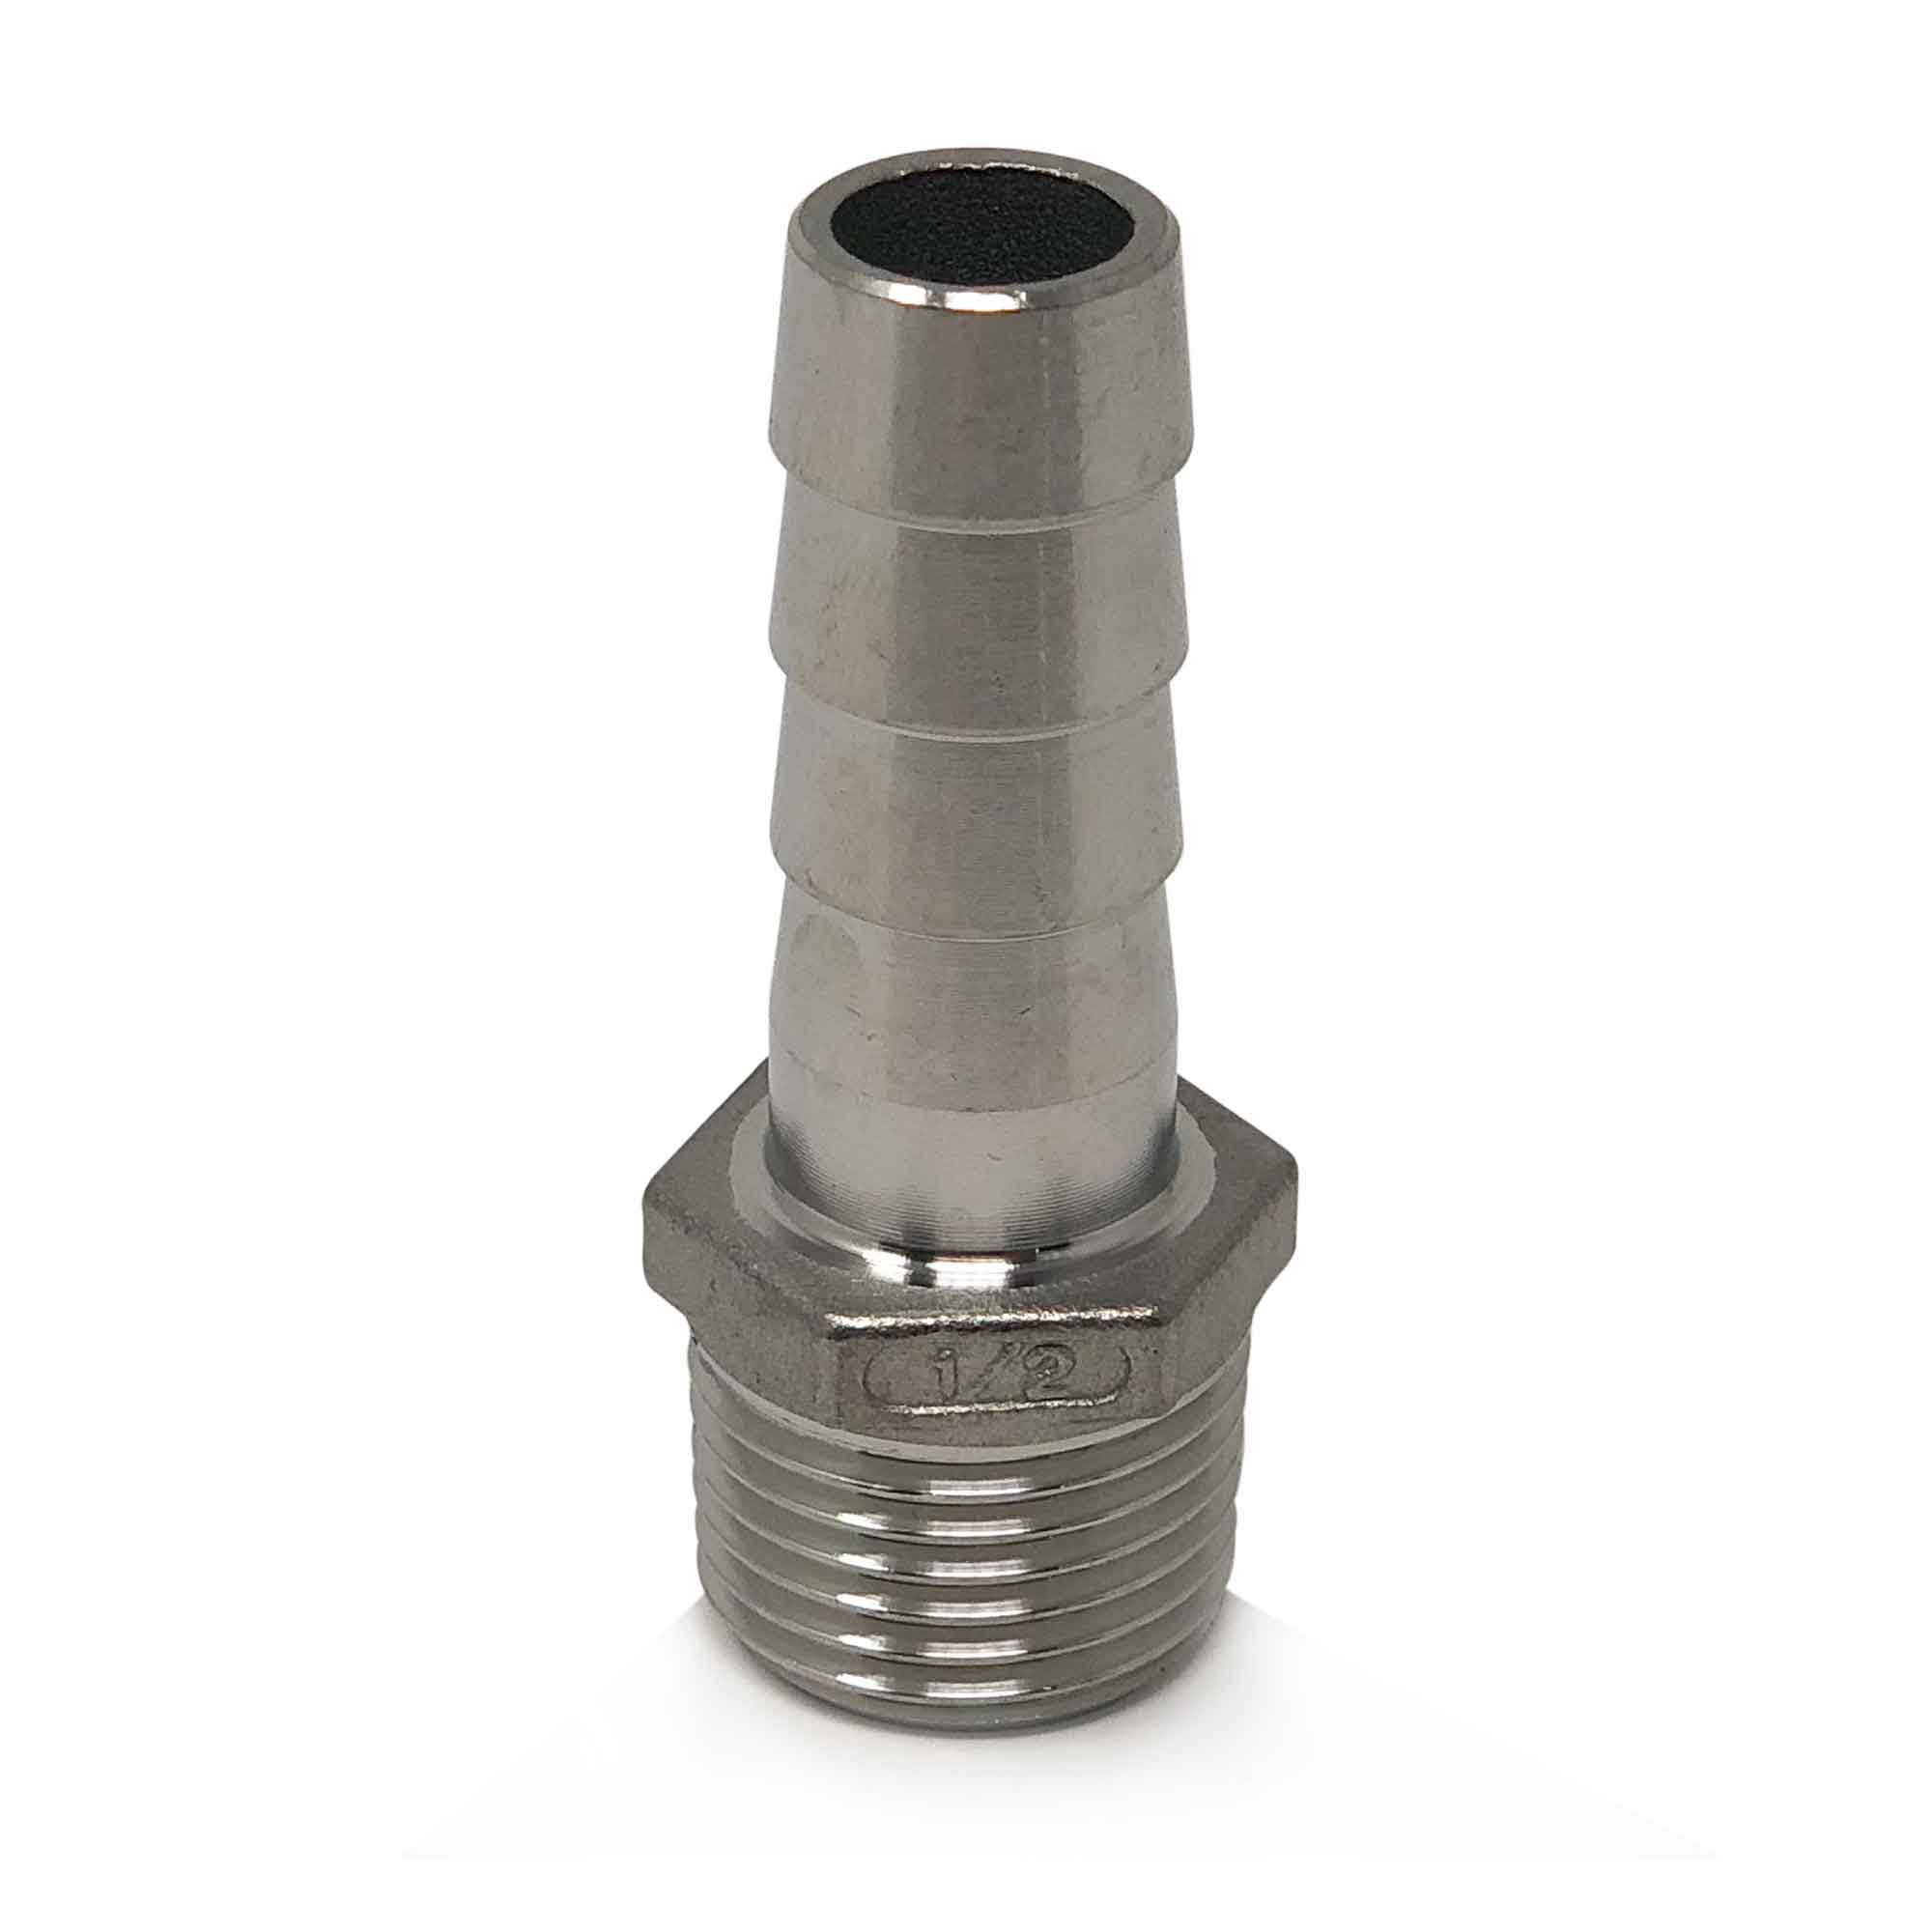 Hose Barb Fitting Connector Adapter 1/2" NPT Male x 7/16" Hose ID - FO4311